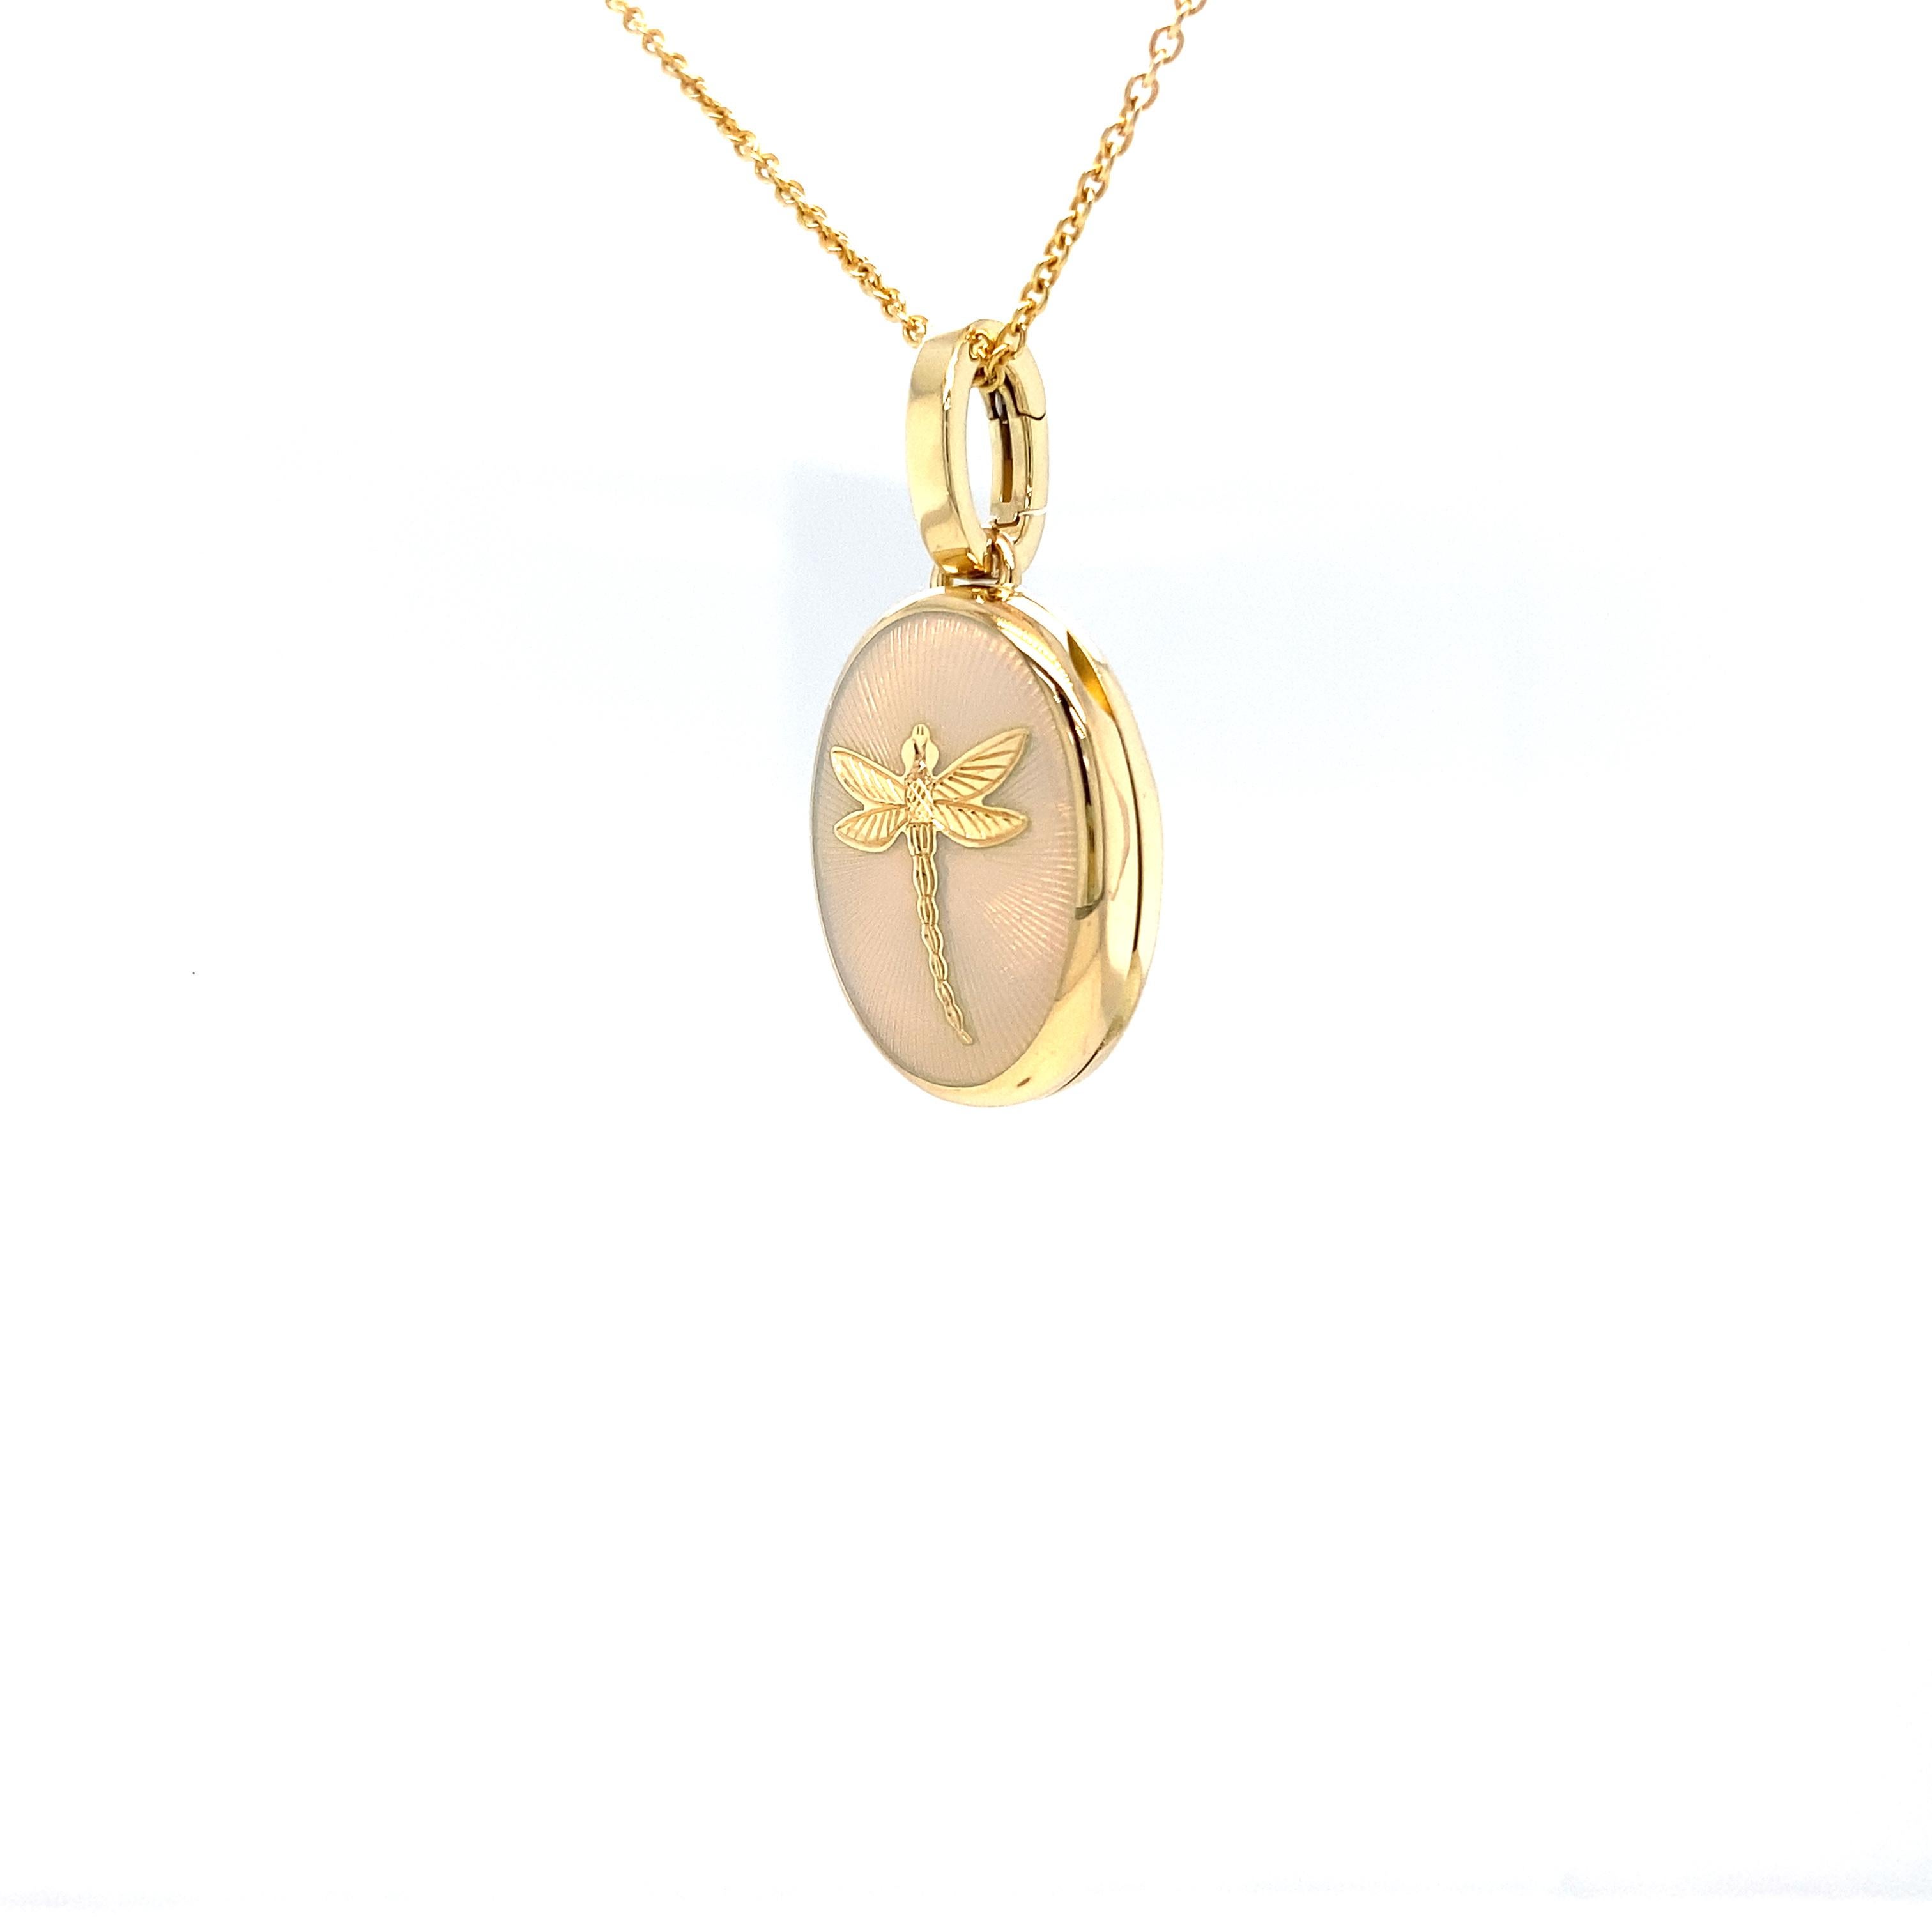 Victor Mayer customizable oval locket pendant necklace with dragonfly 18k yellow gold, Hallmark collection, translucent opalescent white vitreous enamel, guilloche, measurements app. 15.0 mm x 20.0 mm

About the creator Victor Mayer
Victor Mayer is